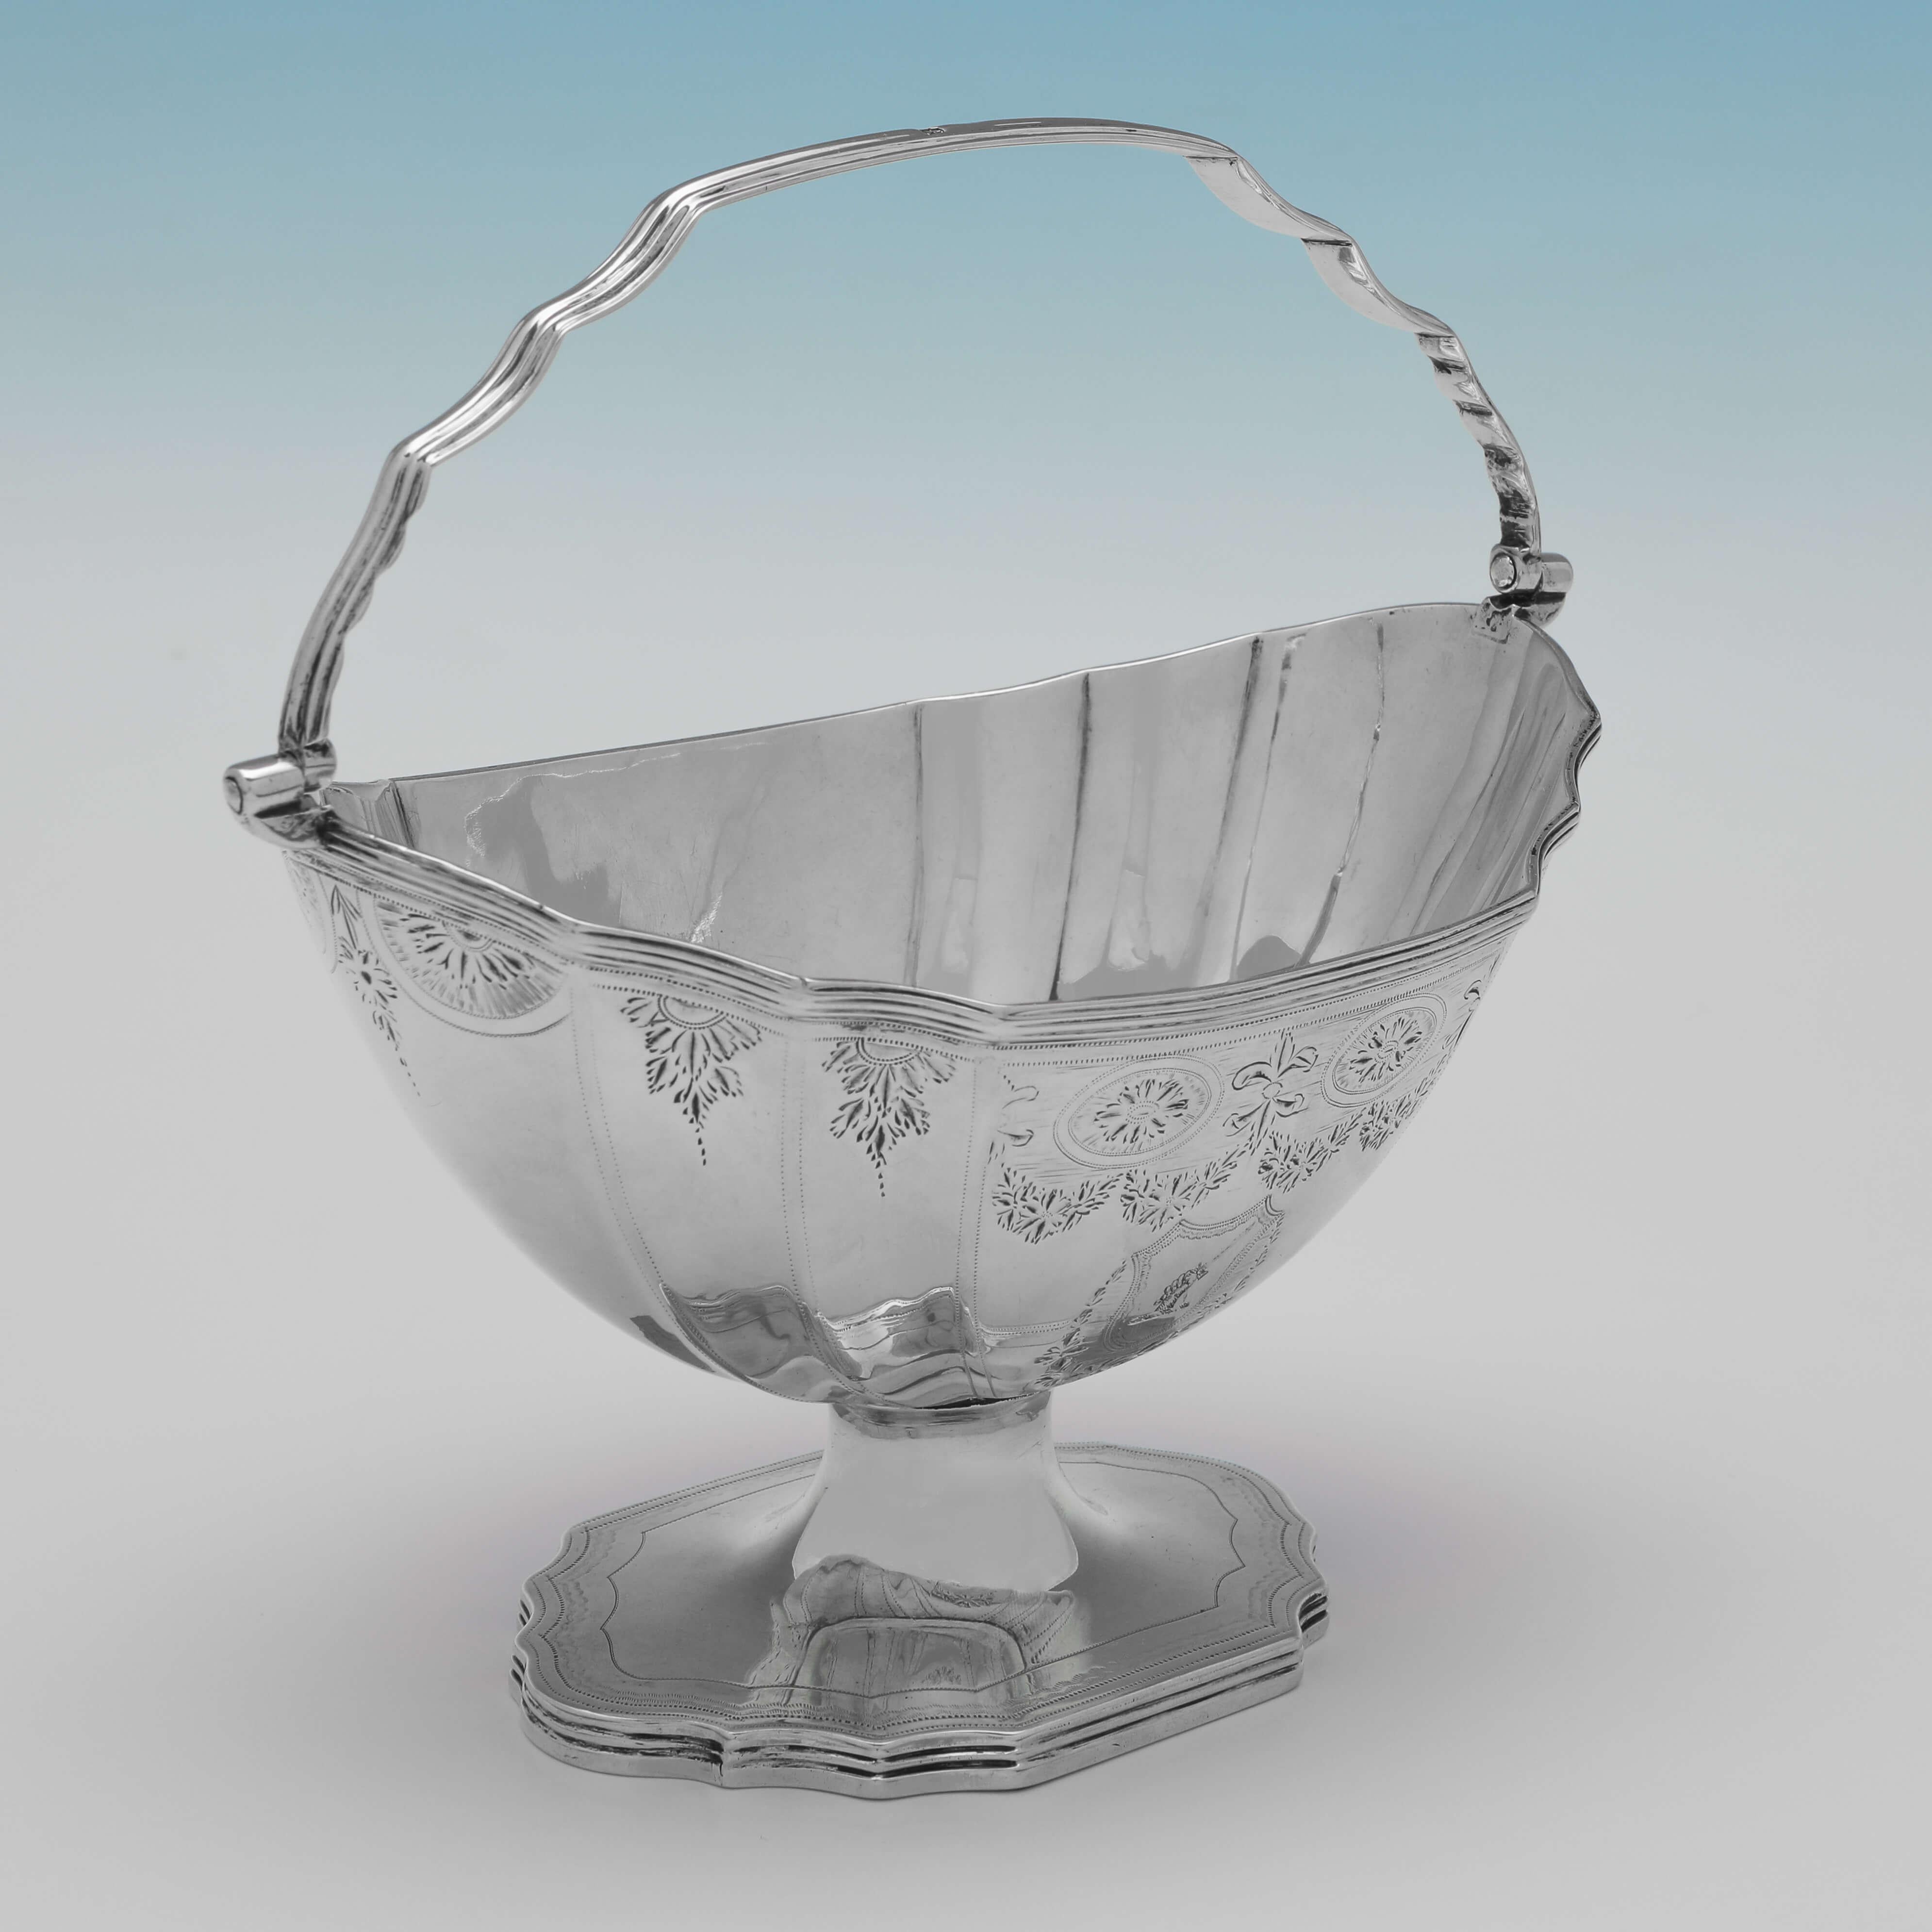 Hallmarked in London in 1795 by Solomon Hougham, this attractive, George III period, Antique Sterling Silver Sugar Basket, is in the Neoclassical taste, with engraved decoration to the body and foot, a swing handle, and an engraved crest to one